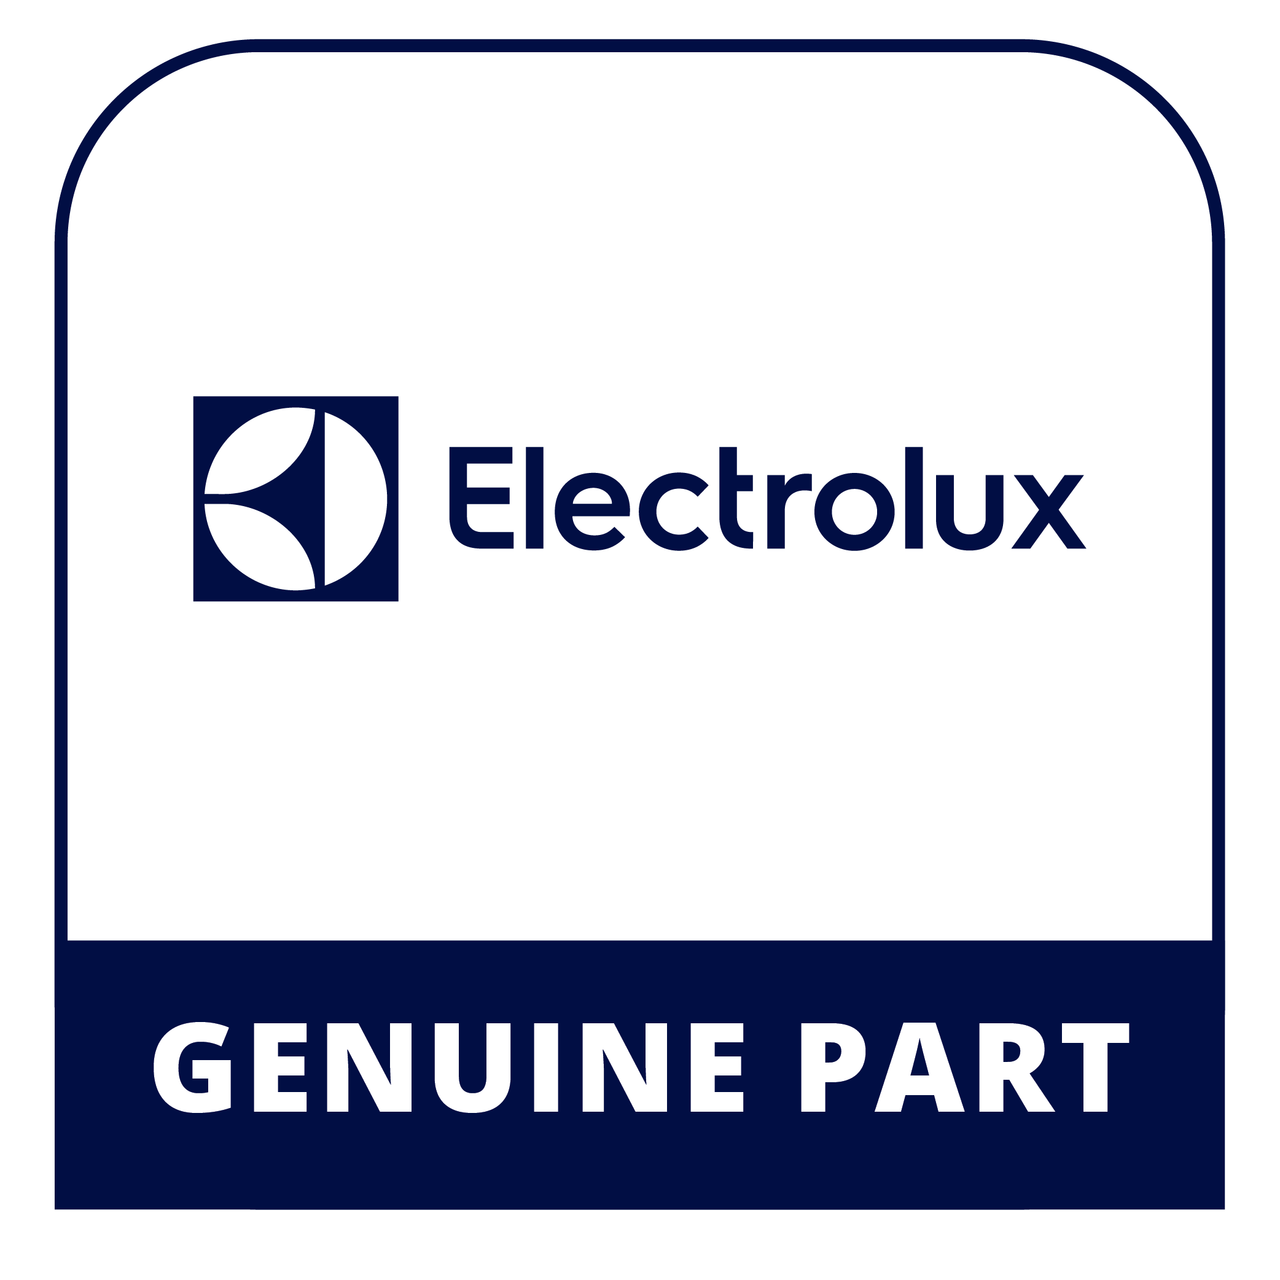 Frigidaire - Electrolux 318205334 Owners Manual - Genuine Electrolux Part